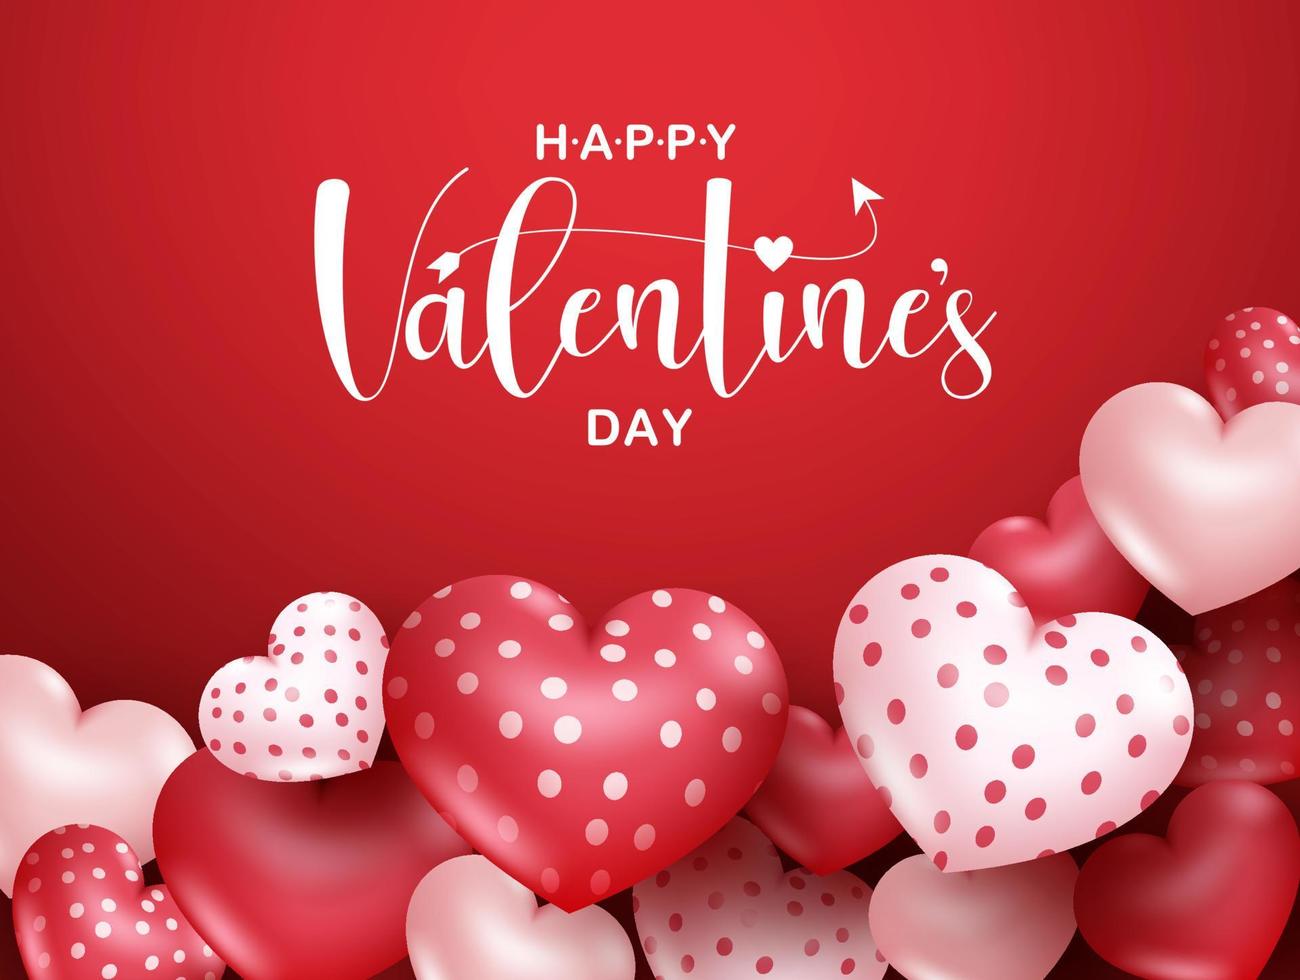 Valentines vector banner background. Happy valentine's day greeting text with balloon hearts in empty space for valentine's day messages greeting card design. Vector illustration